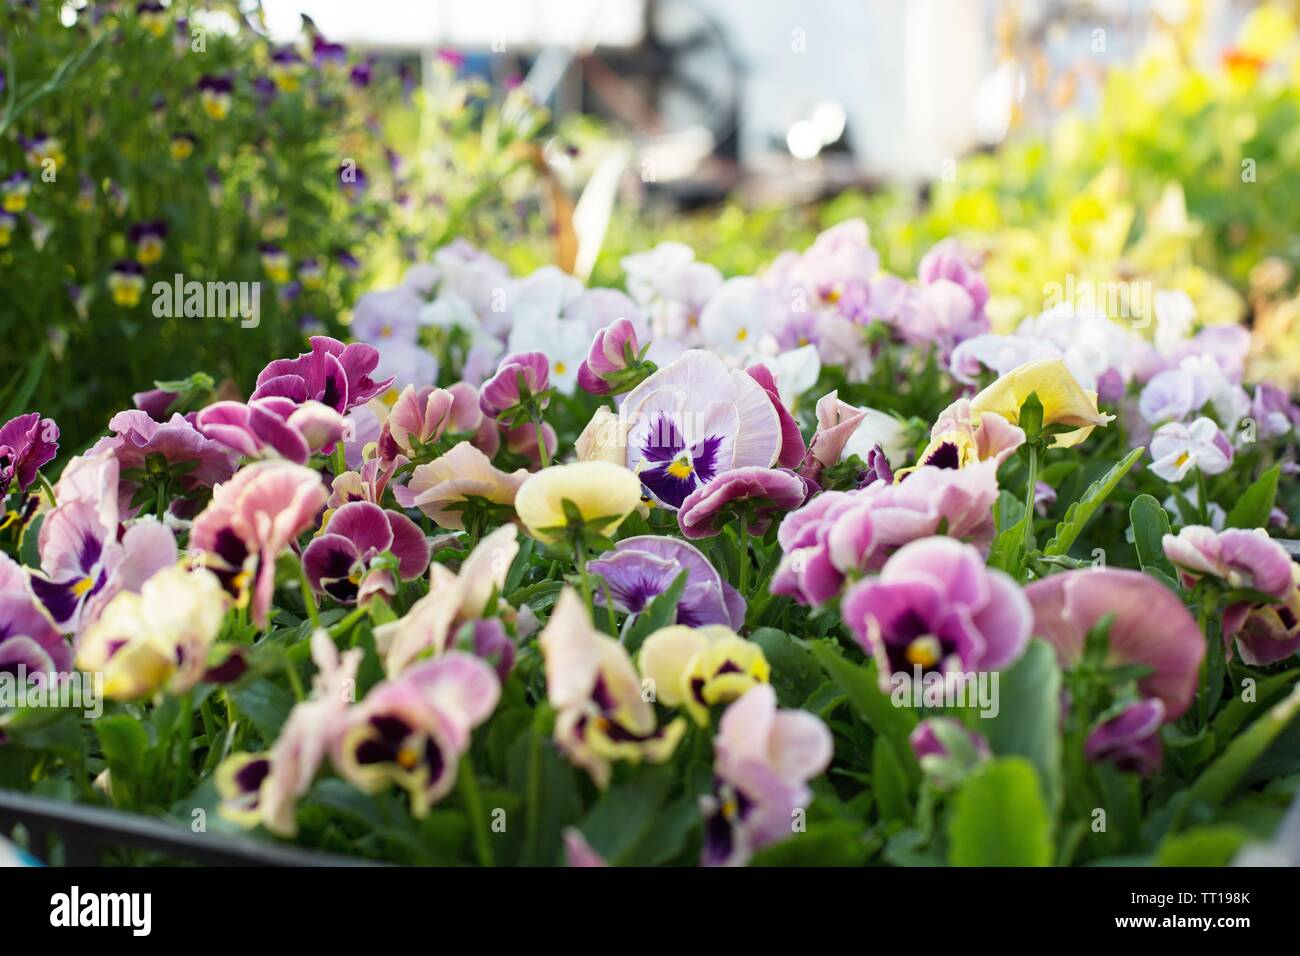 A tray of multi-colored pansies in a greenhouse. Stock Photo